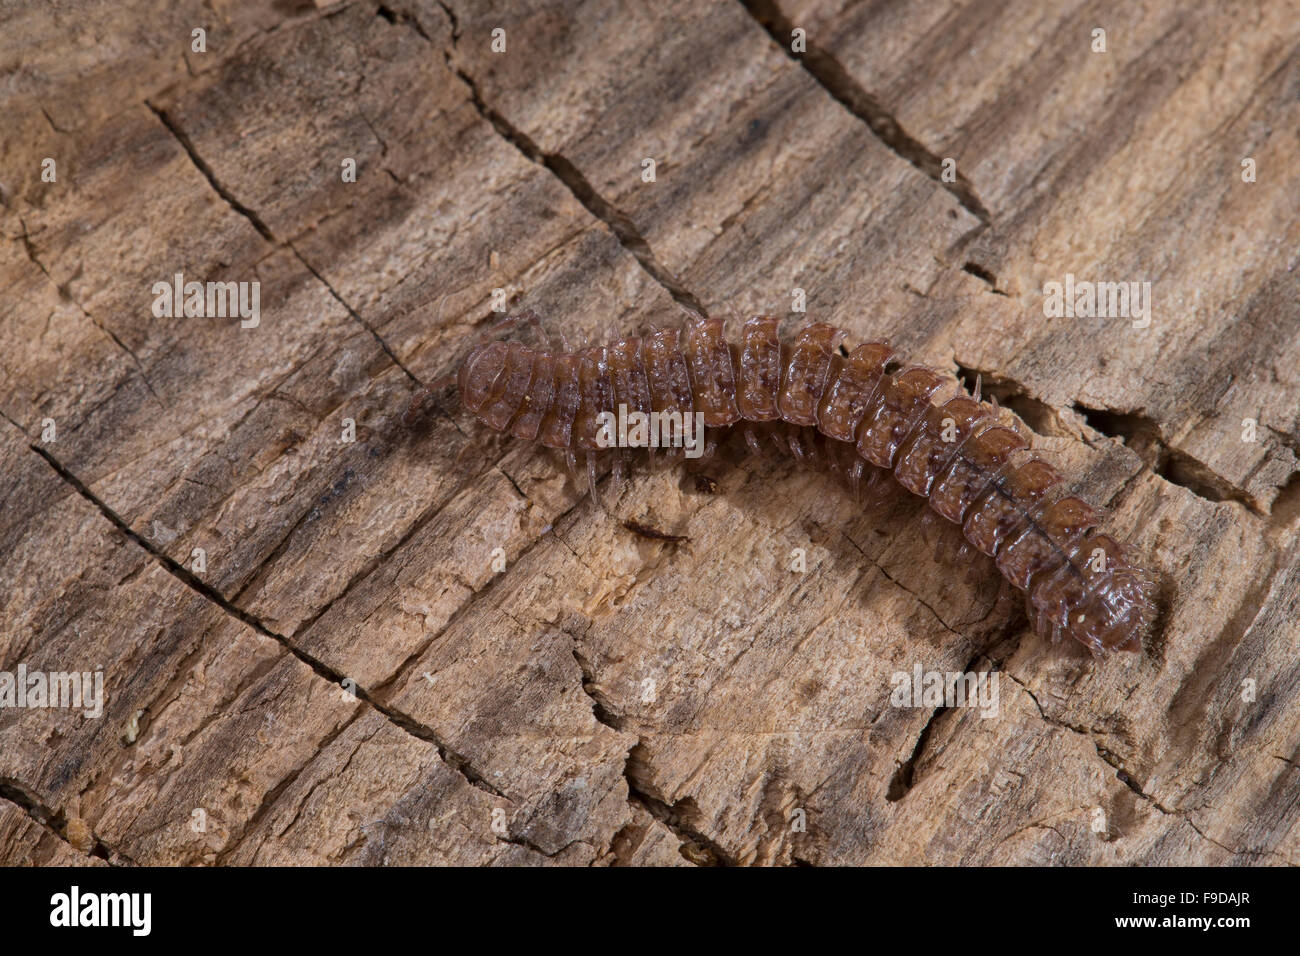 Polydesmus Complanatus High Resolution Stock Photography and Images - Alamy